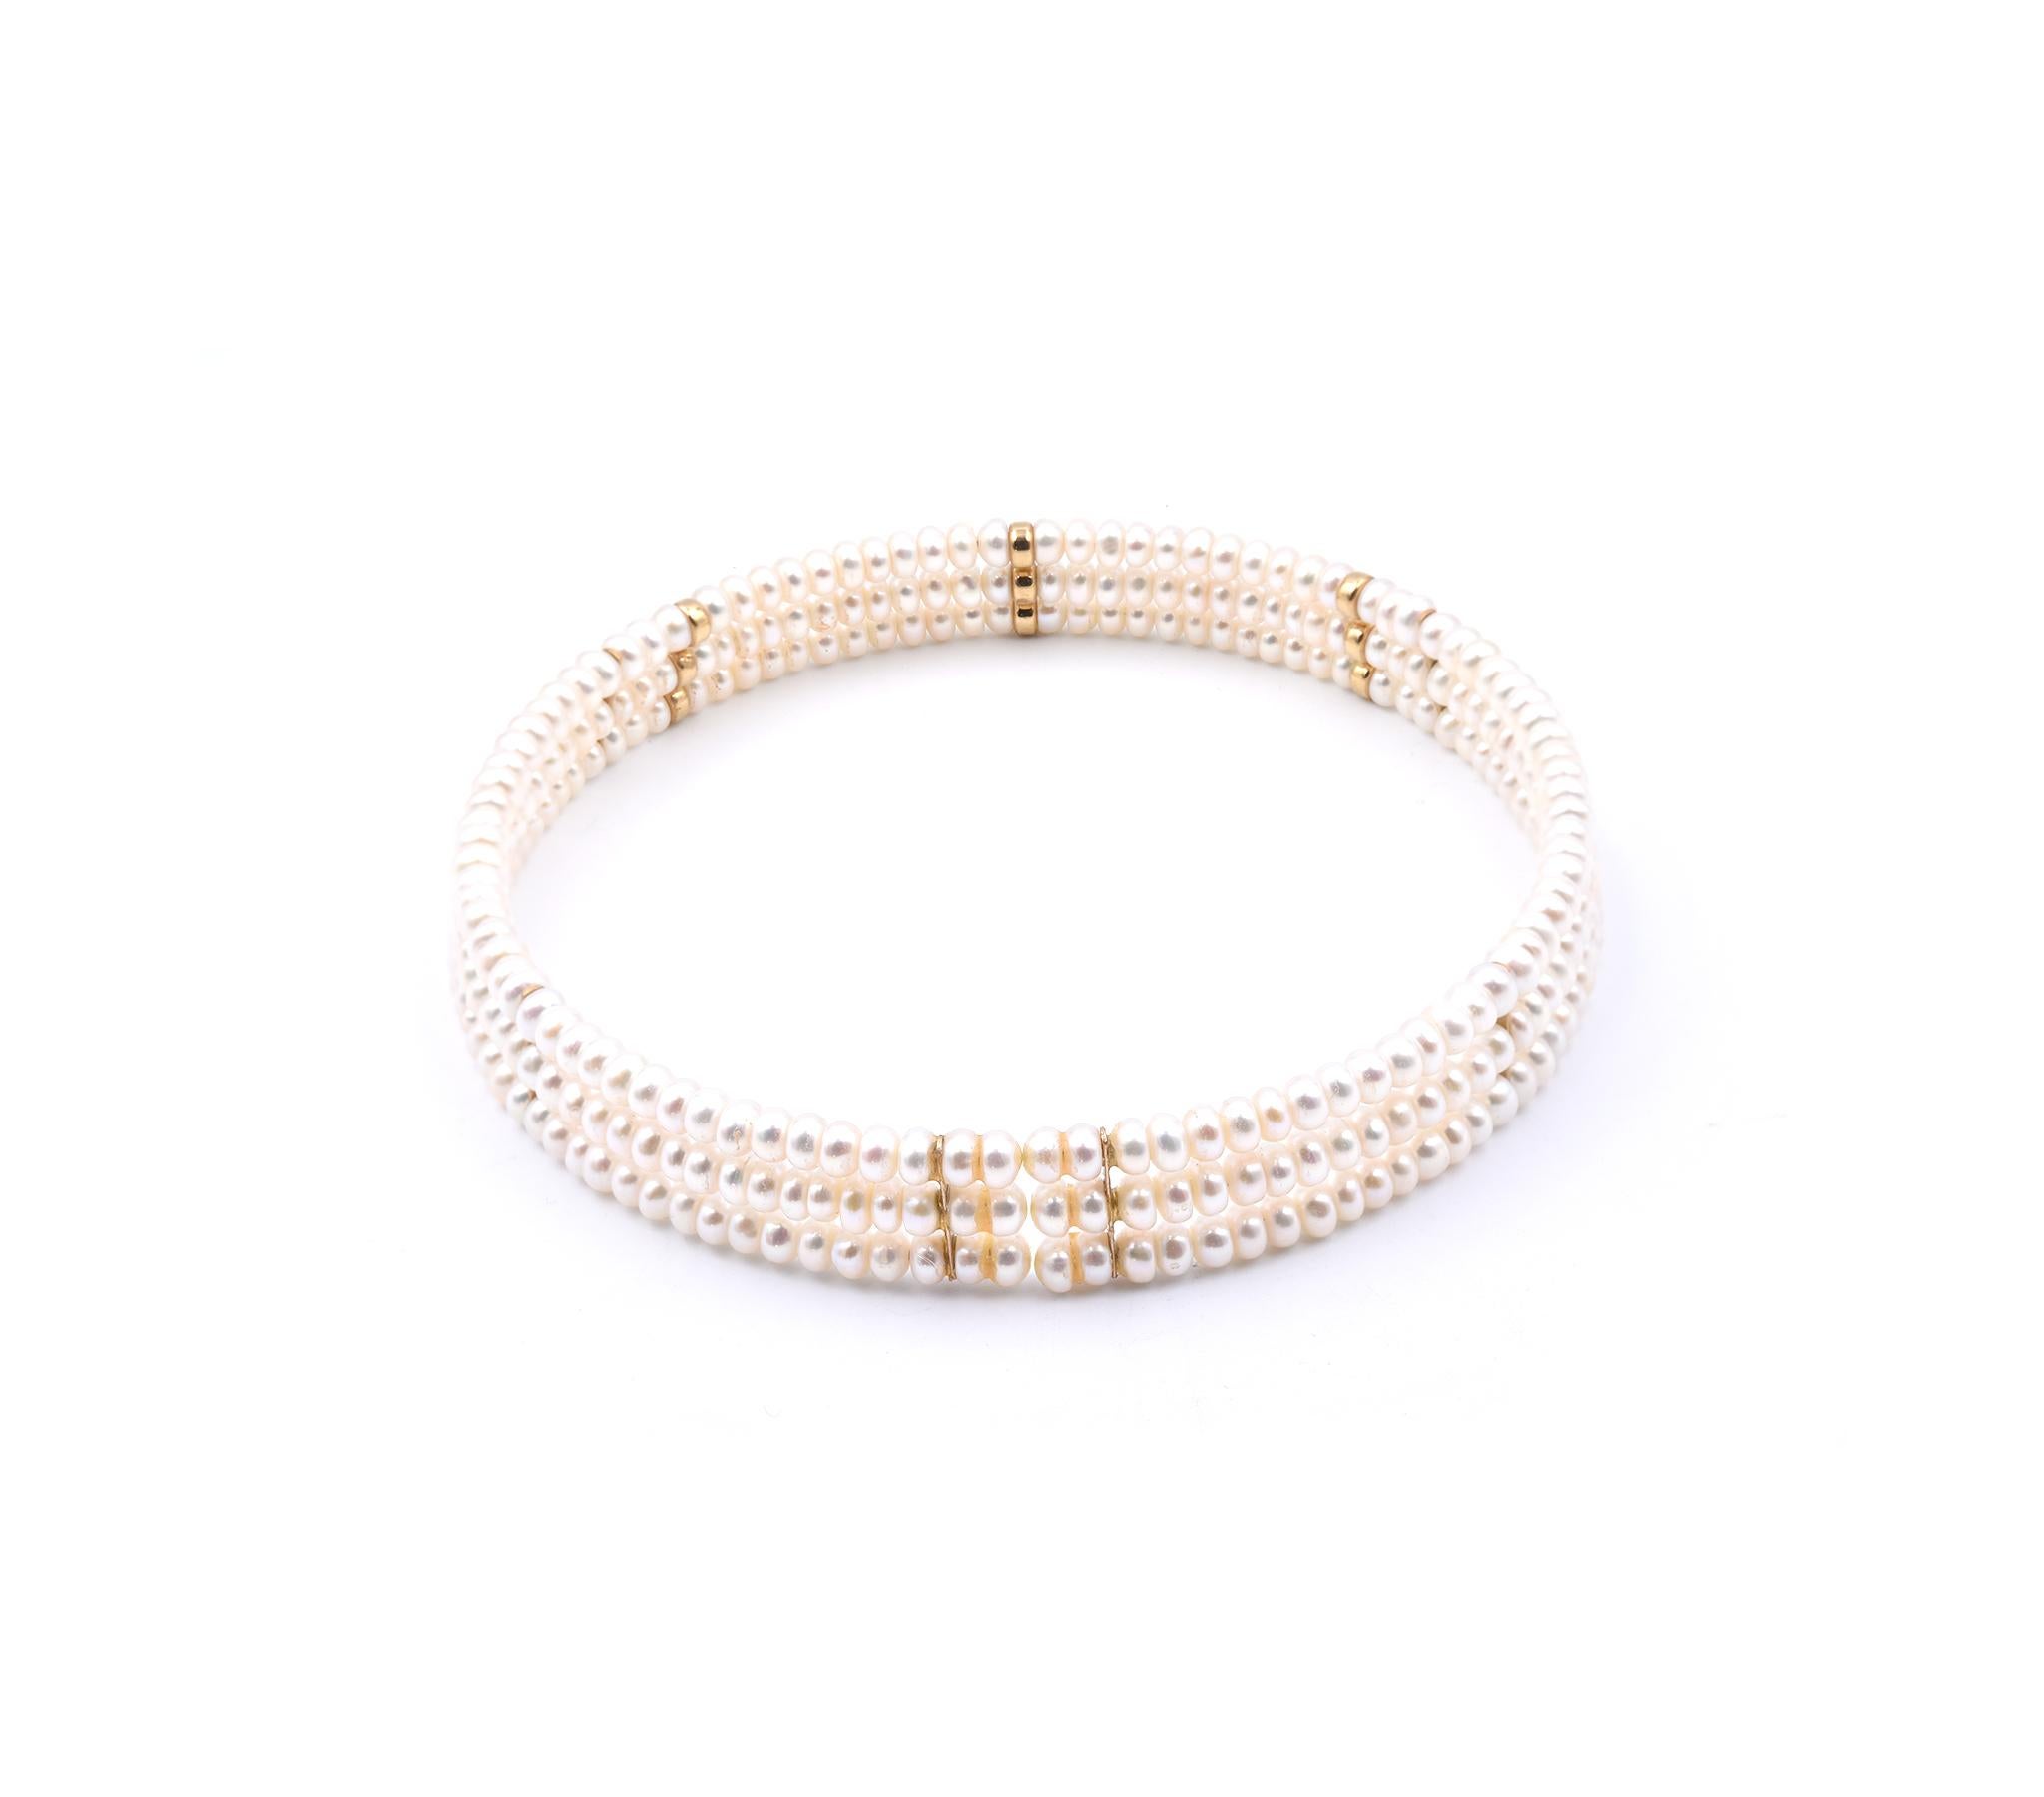 Women's 14 Karat Yellow Gold Station Pearl Necklace